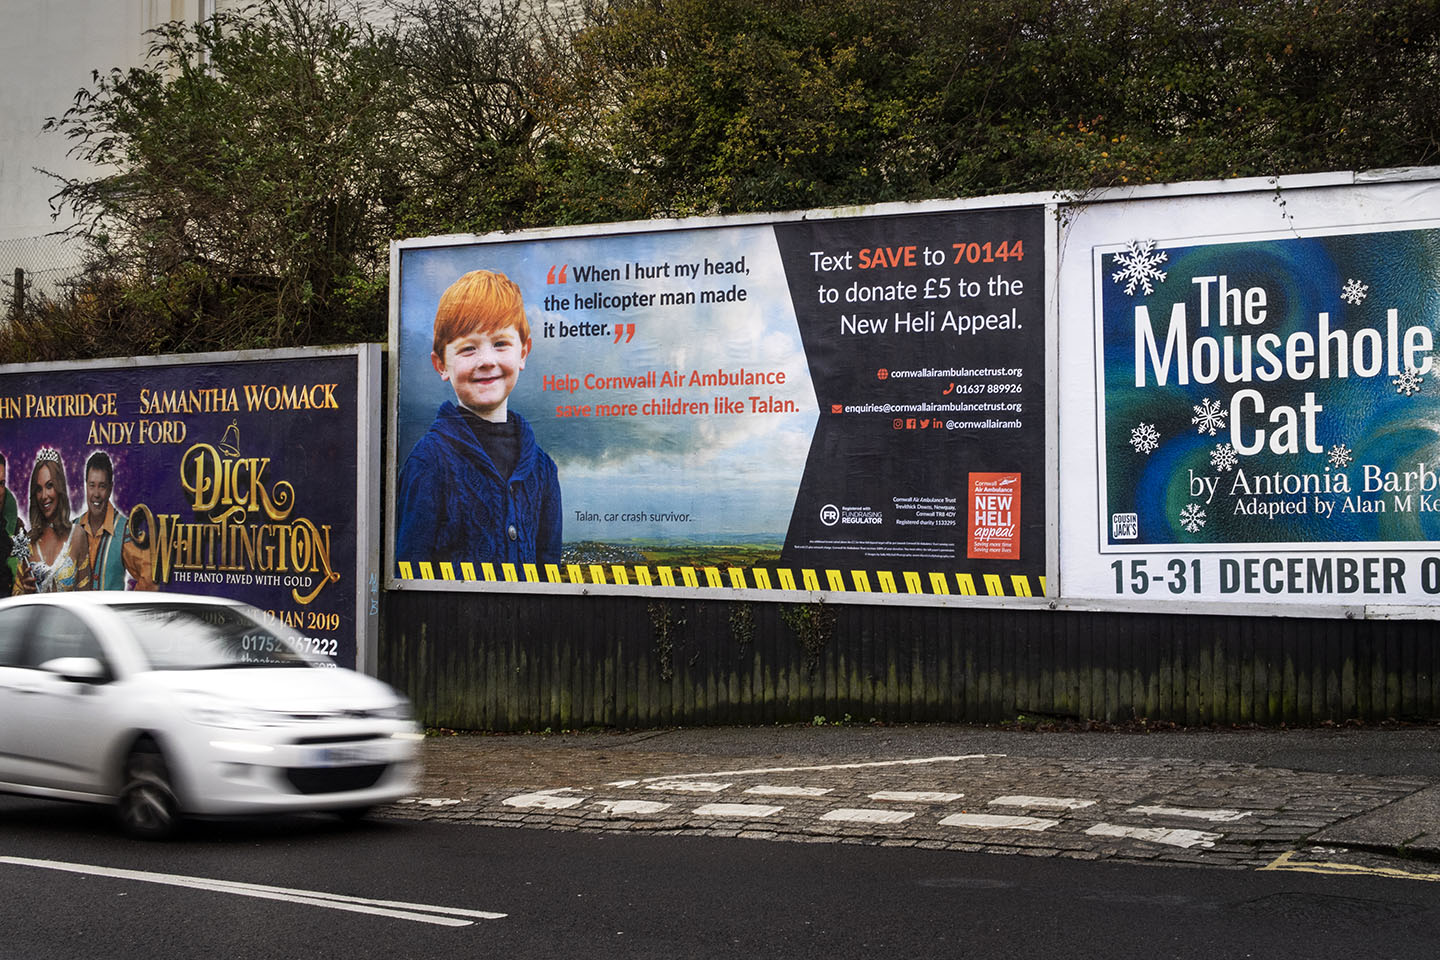 Large billboard advertisement featuring a photo of a little boy whose life was saved by Cornwall Air Ambulance